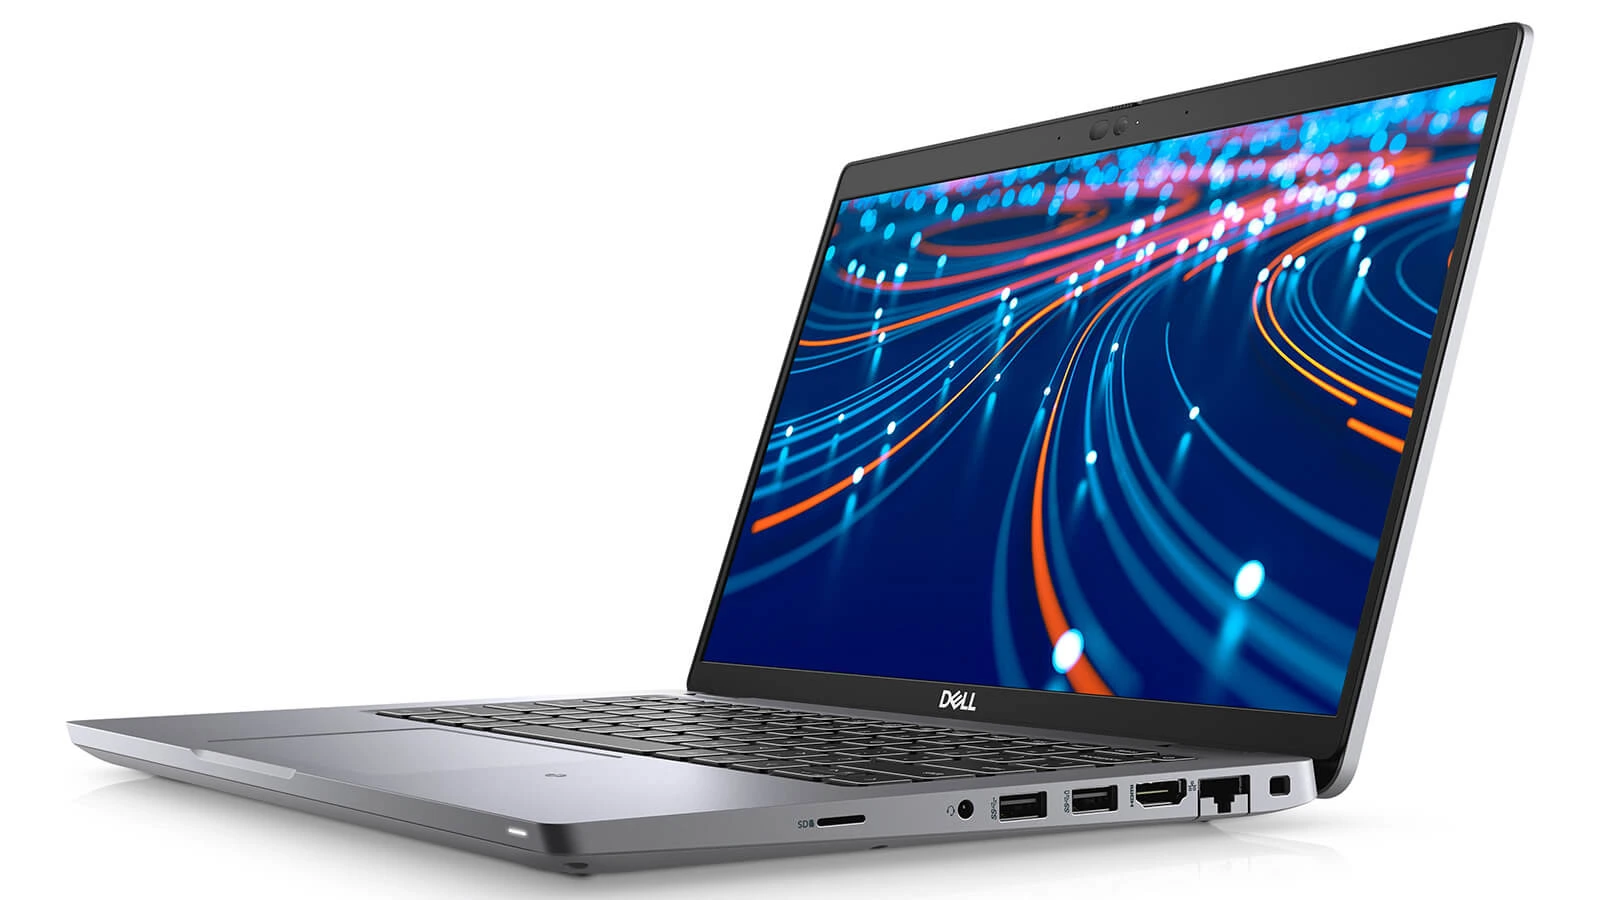 Dell Latitude 5420 Features 03